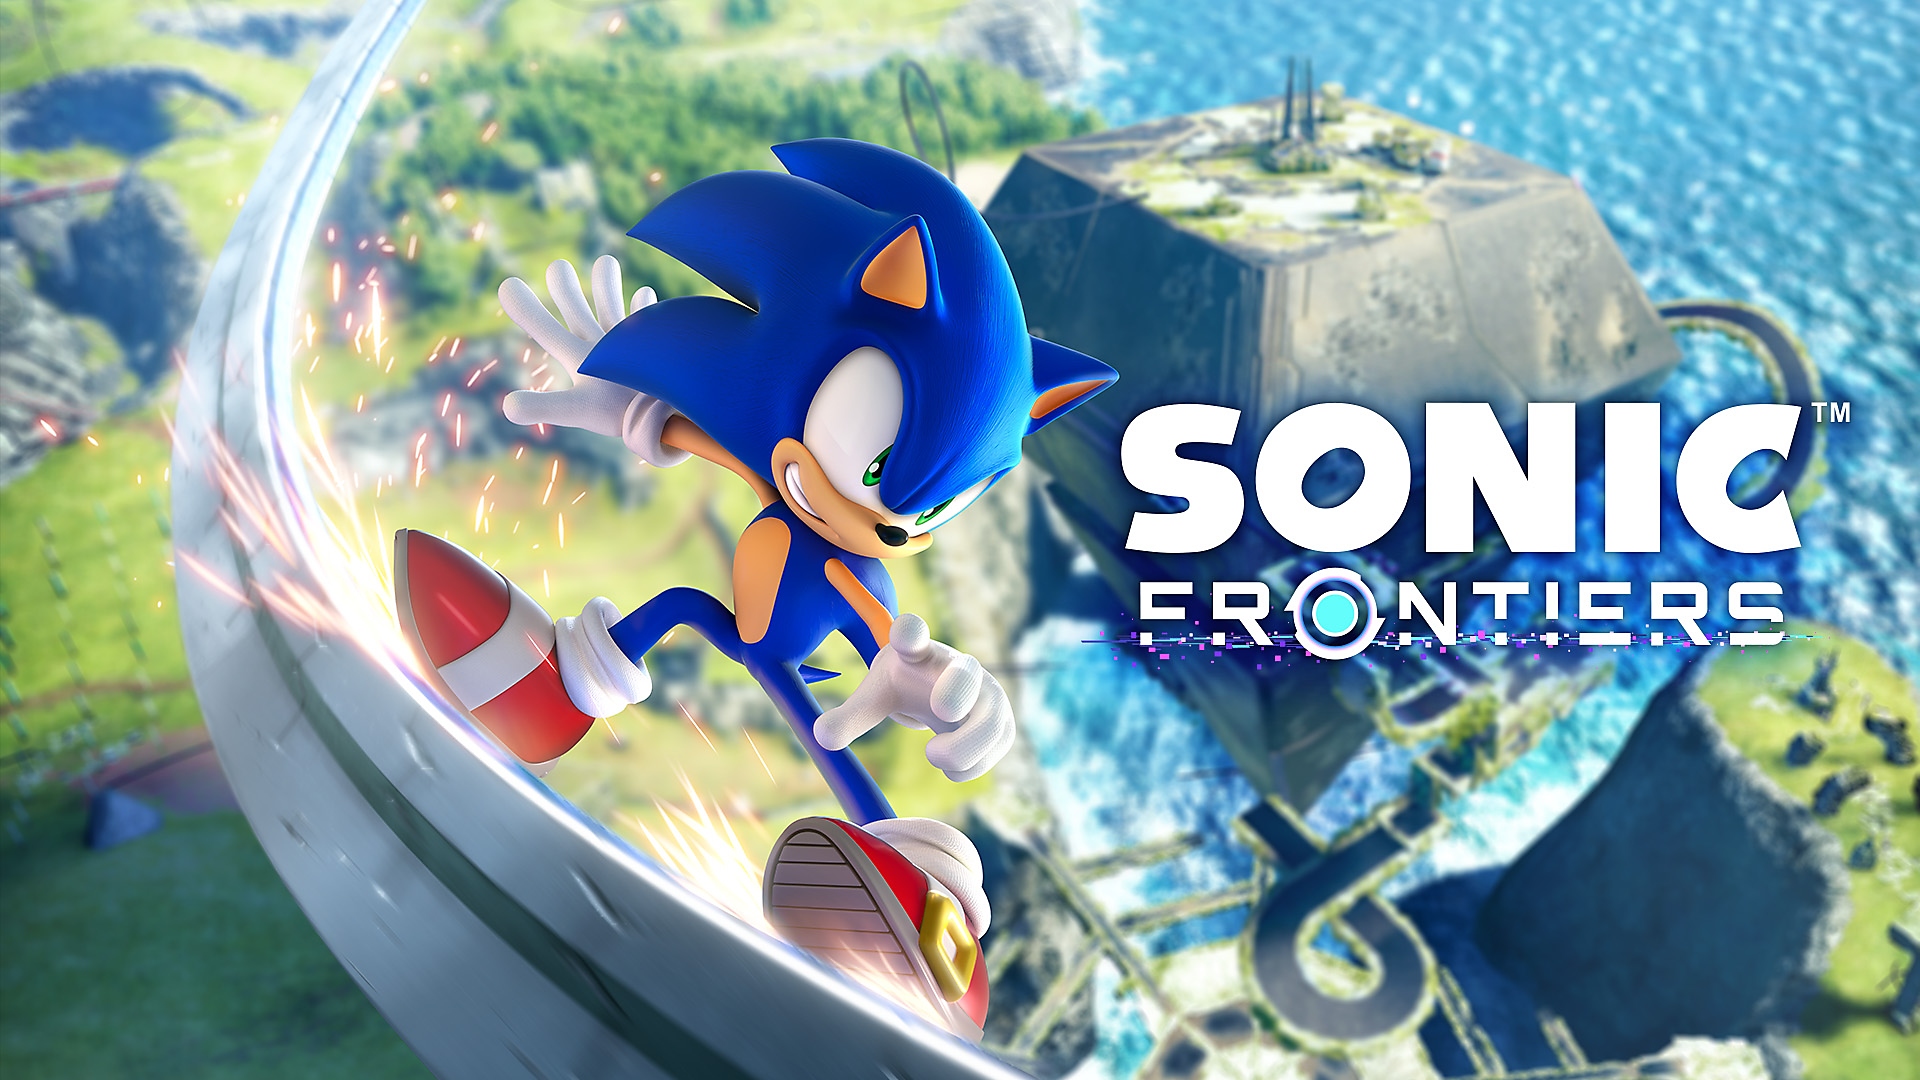 Sonic Frontiers - Launch Trailer | PS5 and PS4 Games